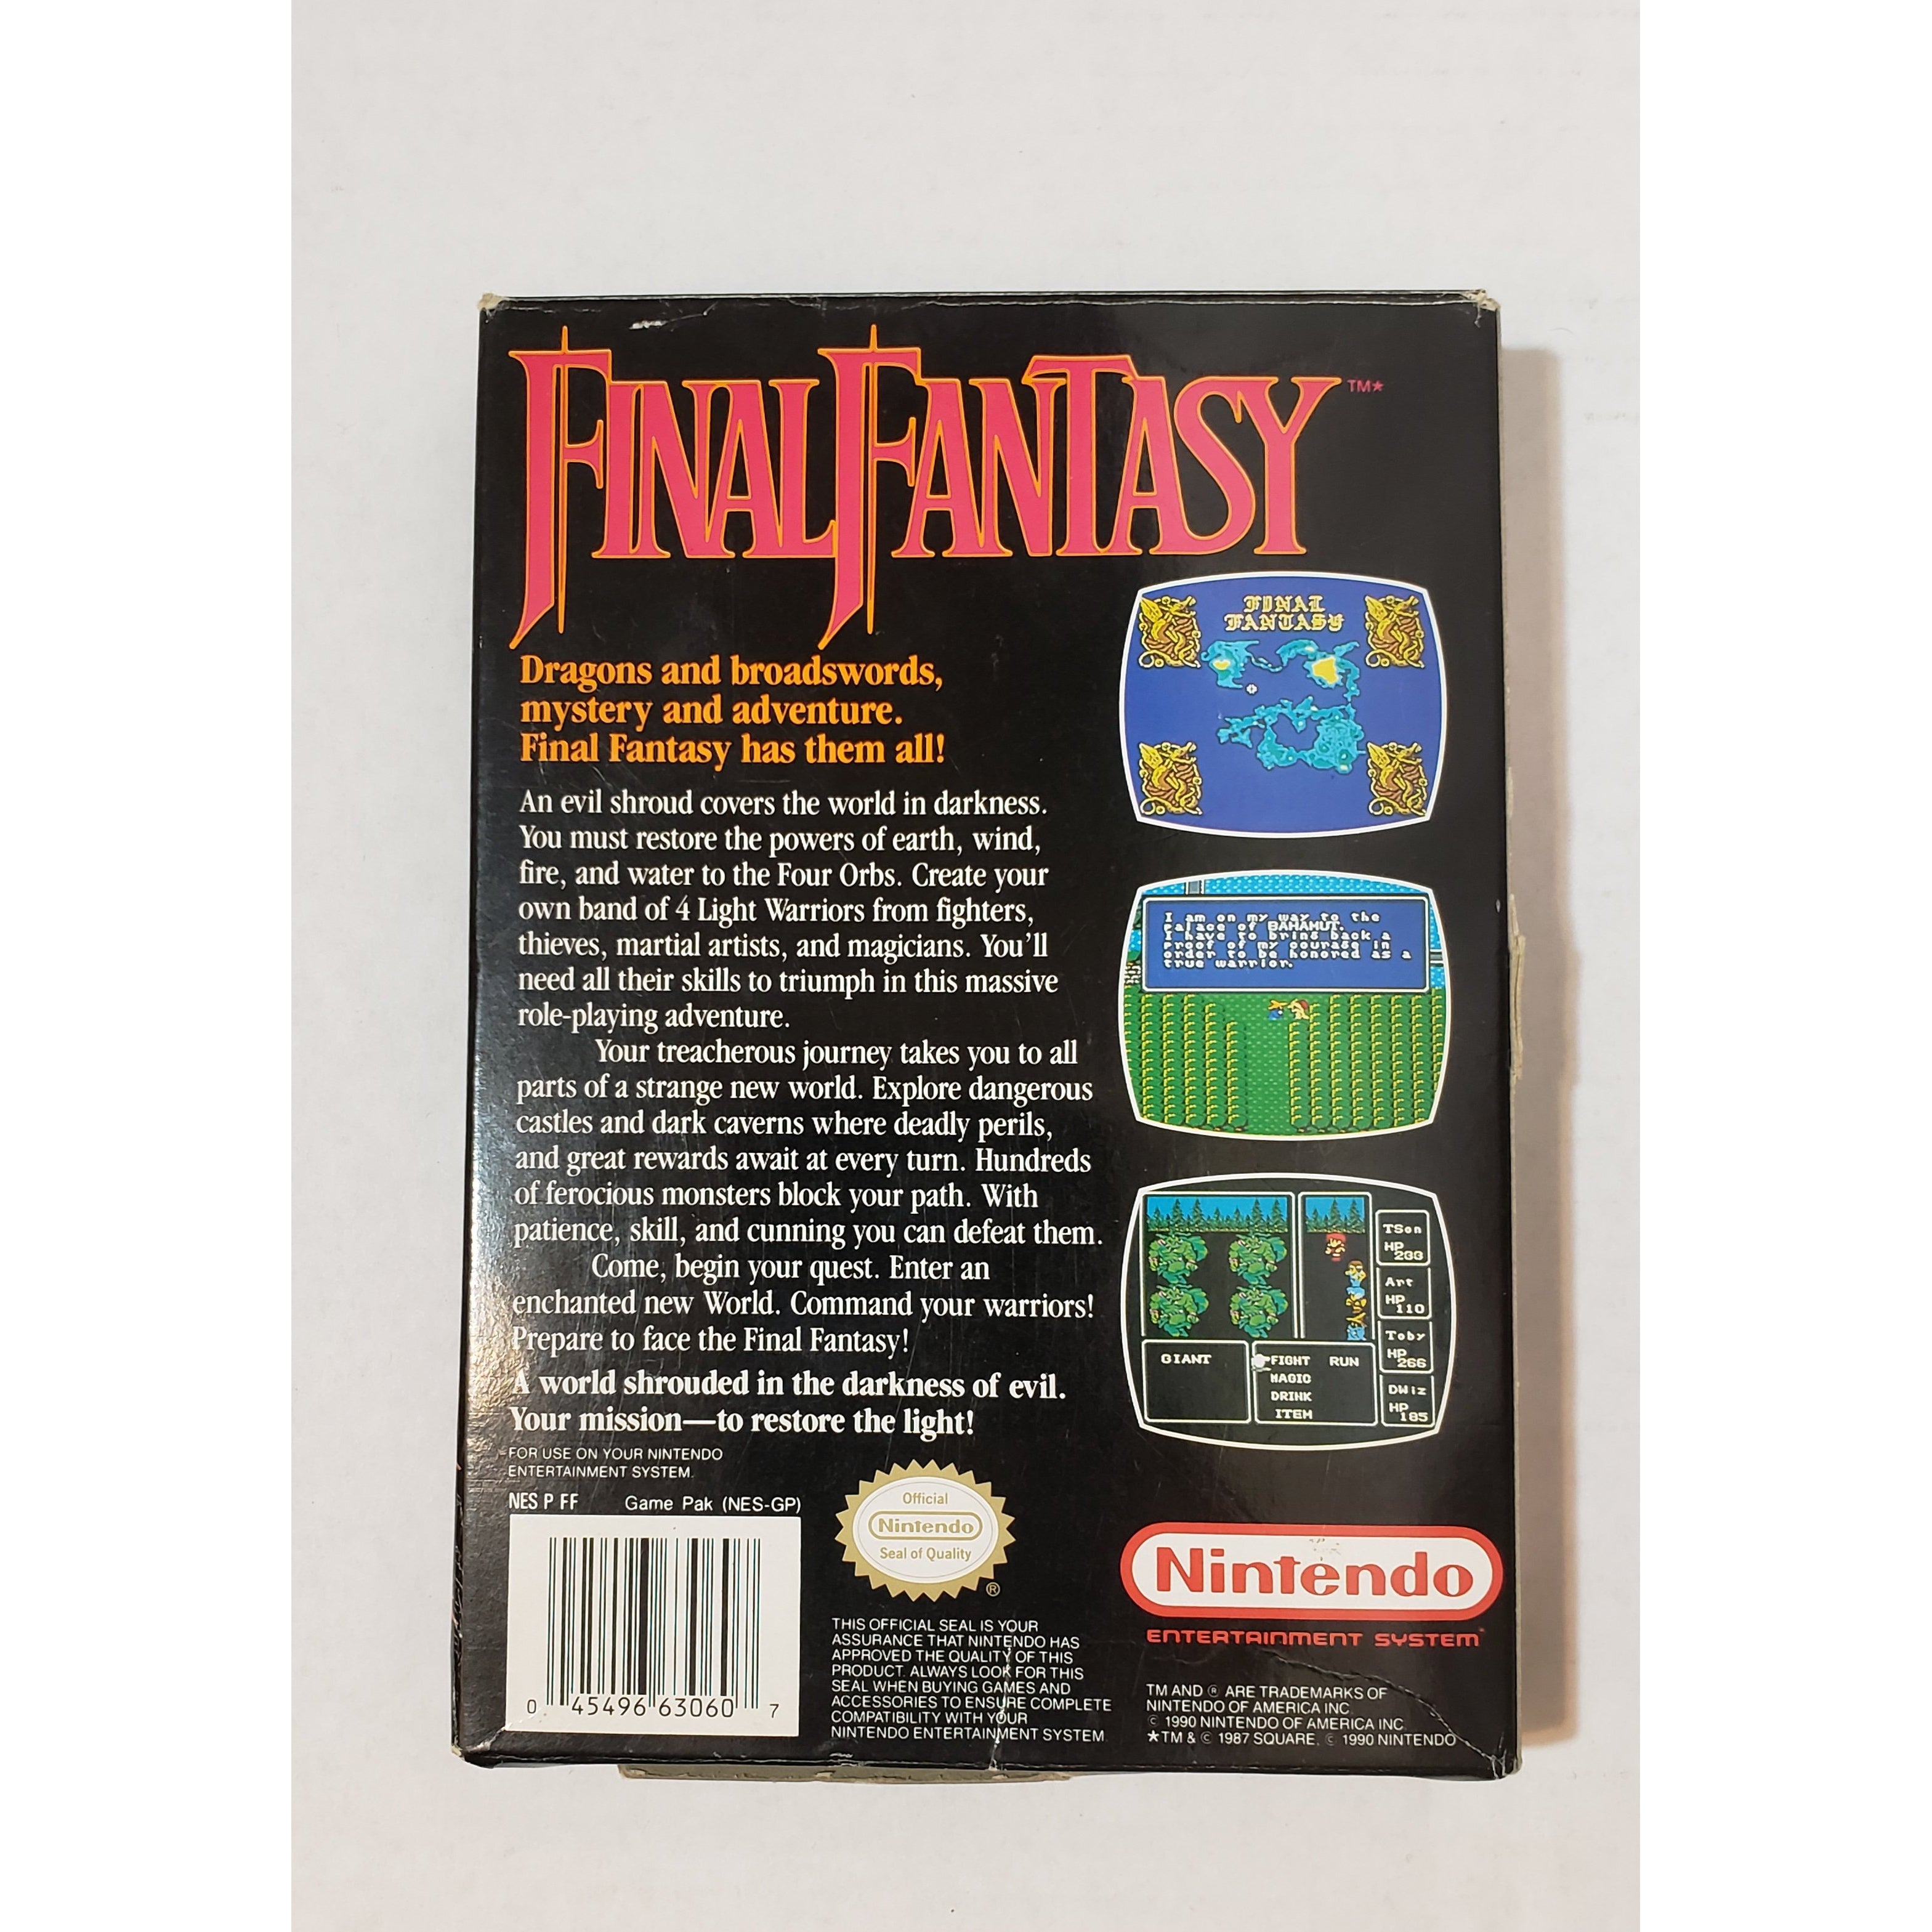 Final Fantasy - Authentic NES Game Complete - YourGamingShop.com - Buy, Sell, Trade Video Games Online. 120 Day Warranty. Satisfaction Guaranteed.